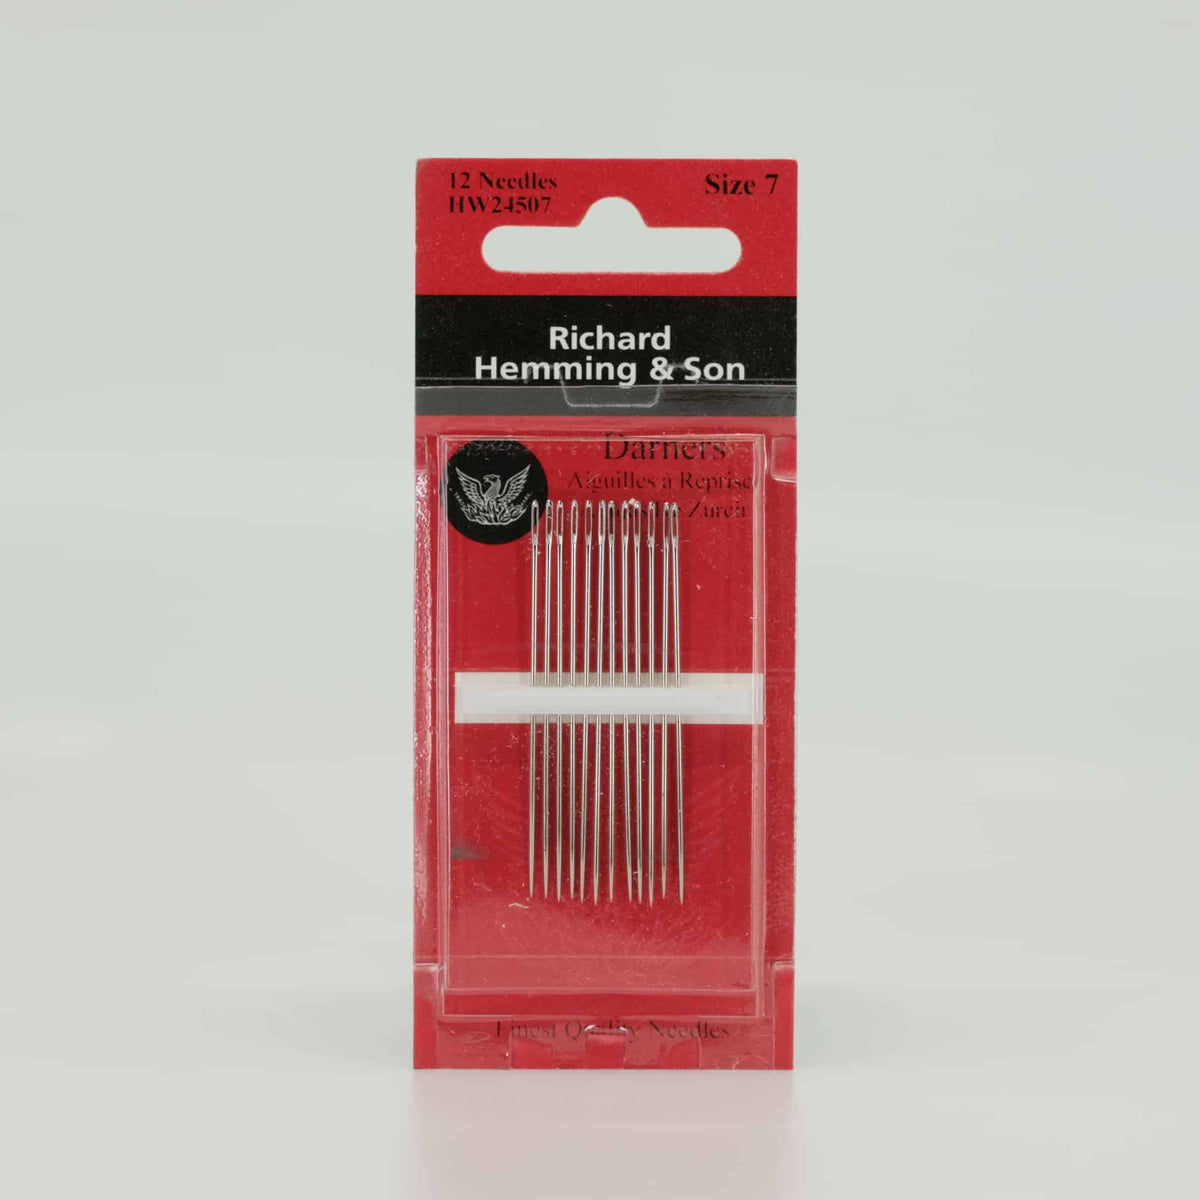 Sewing, embroidery and darning needles in needle box